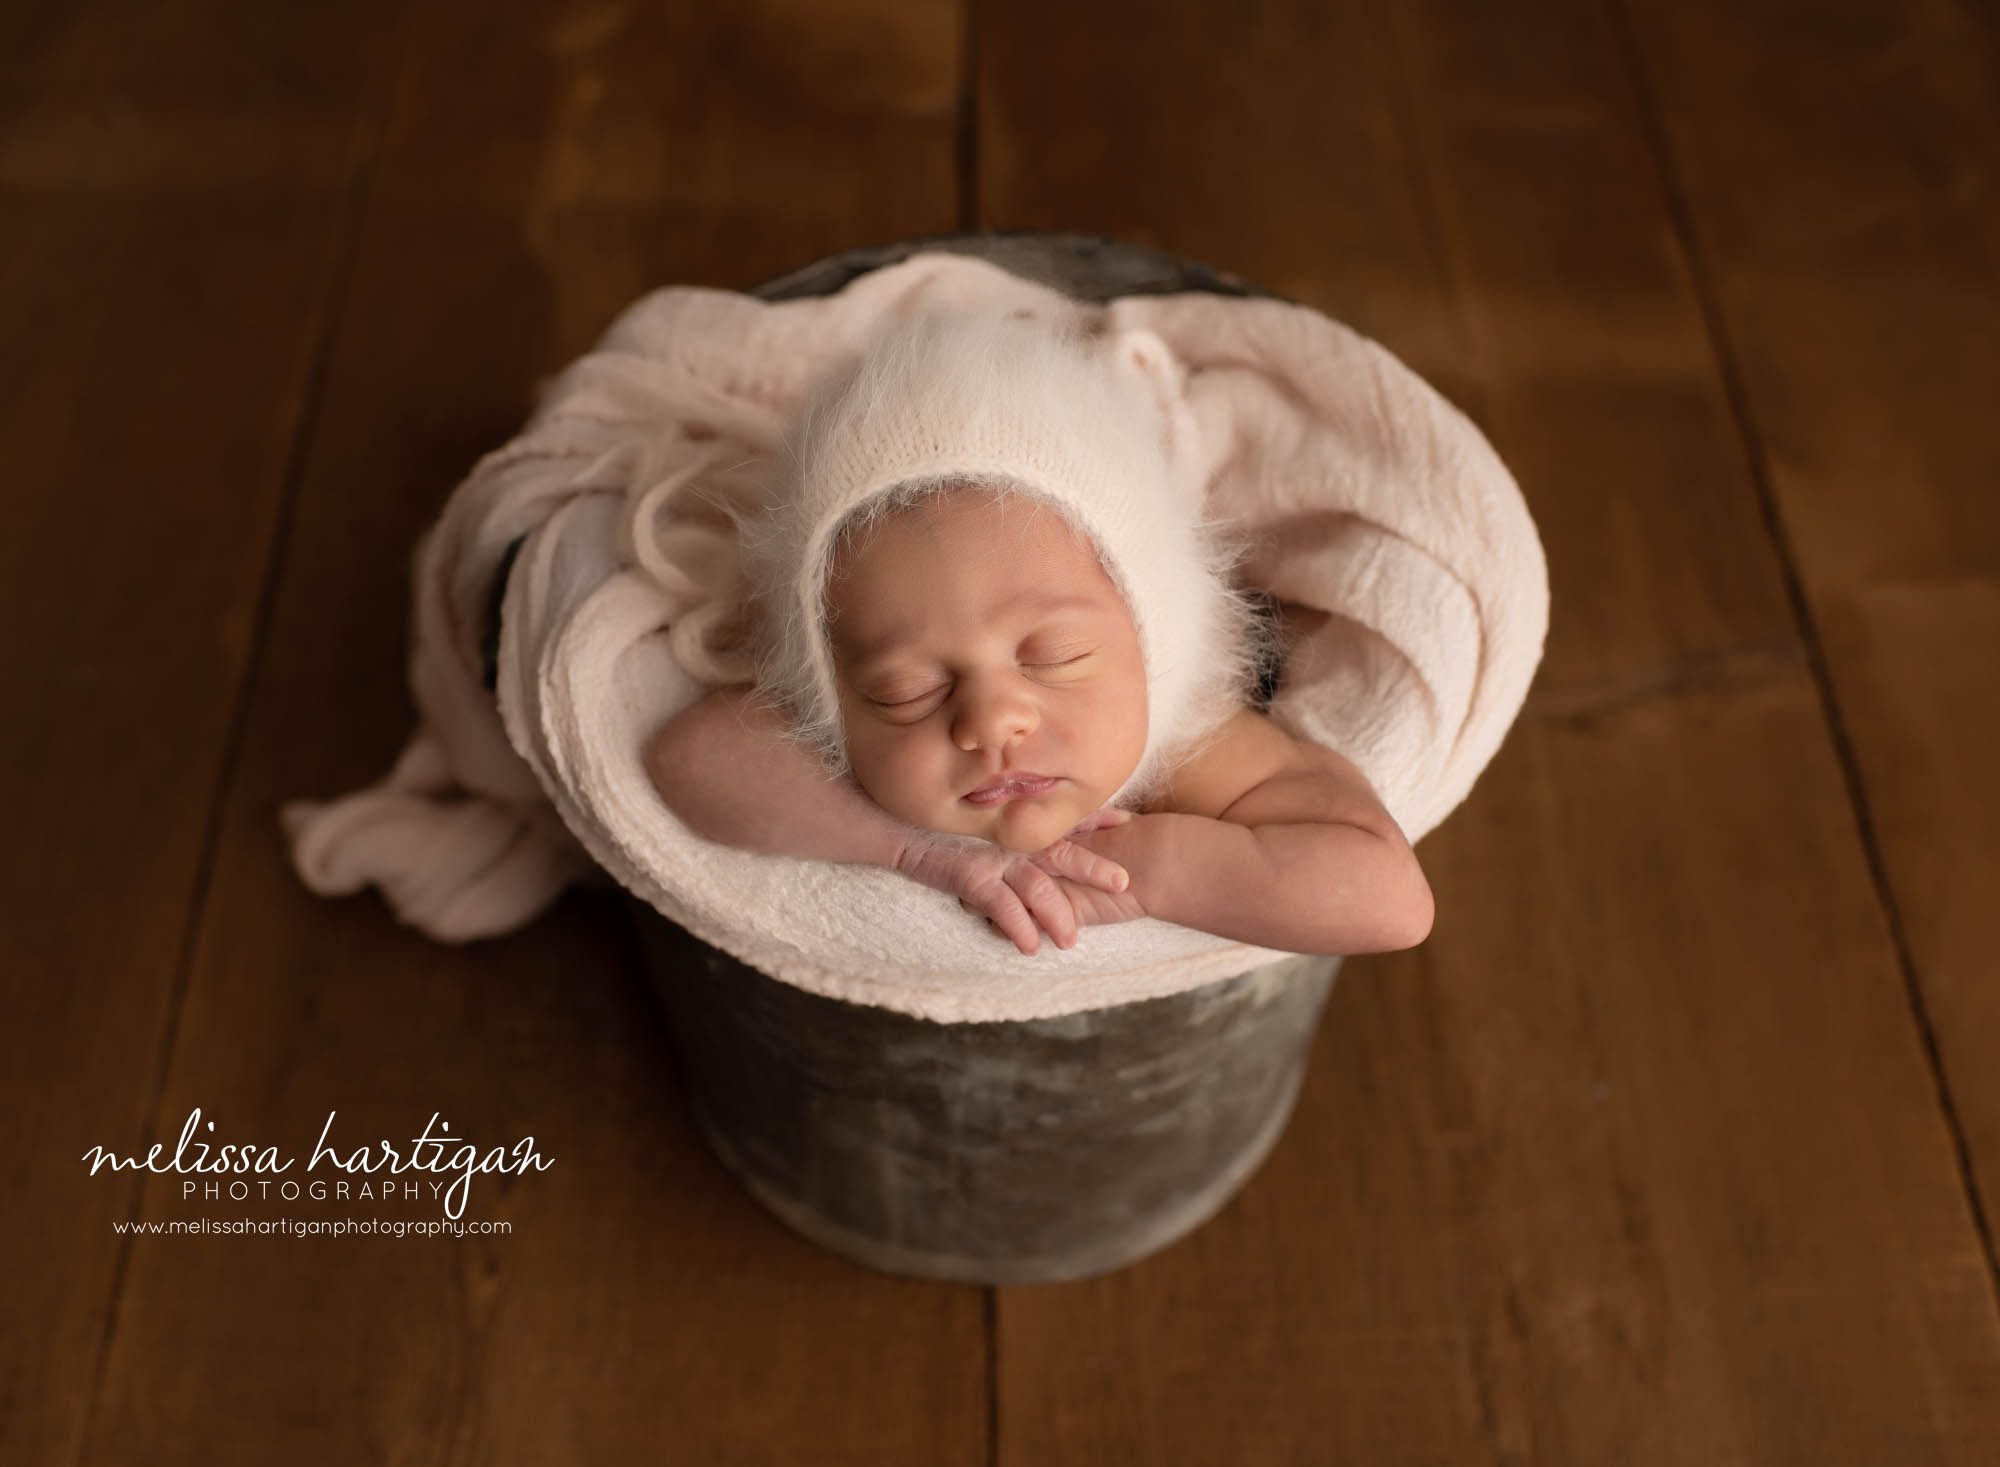 baby girl posed with angora knitted bonnet posed in bucket with chin on hands